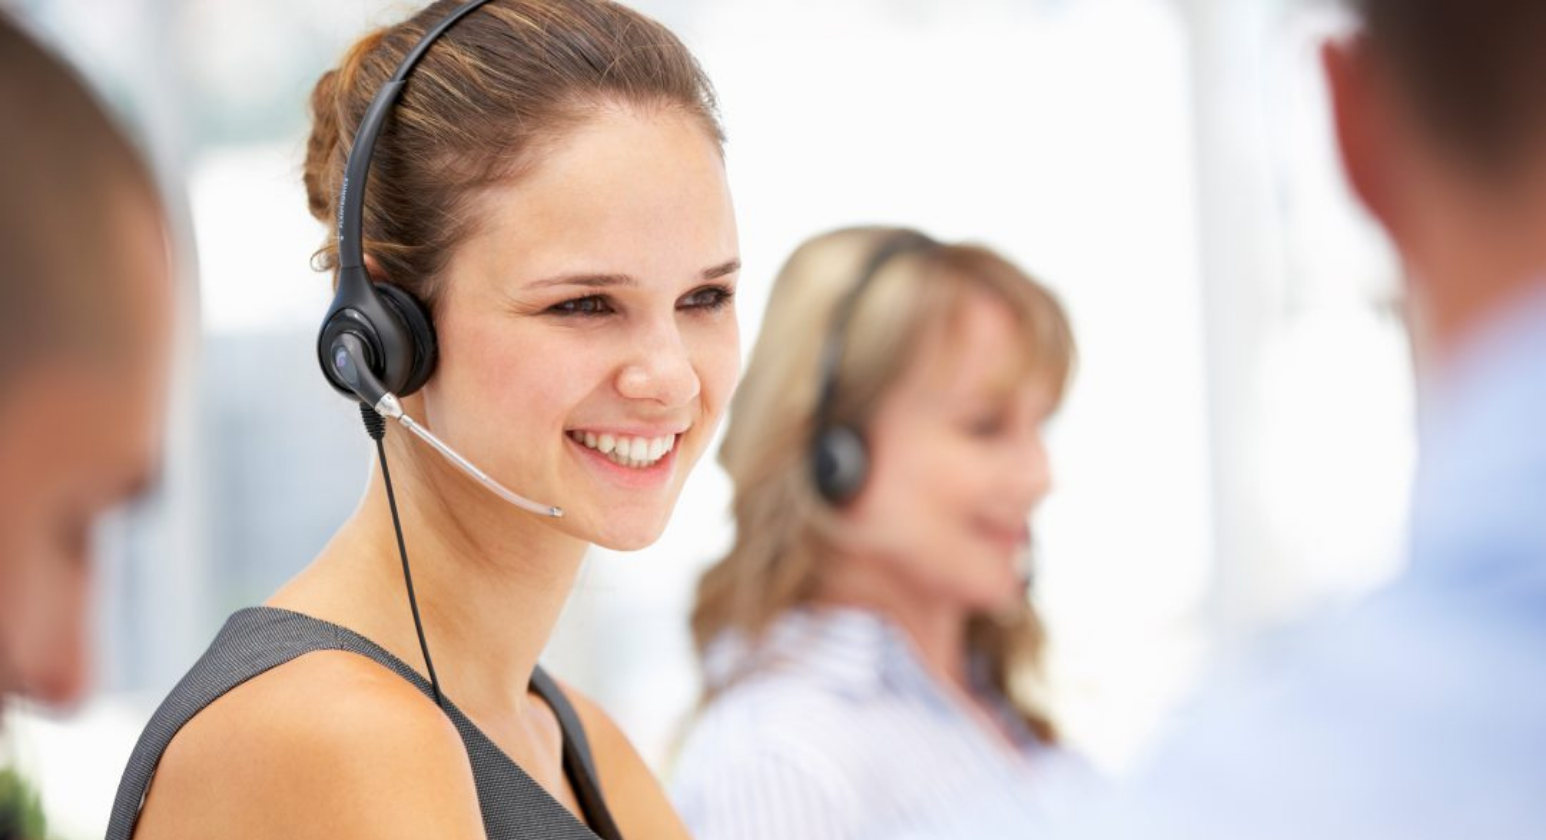 telemarketing lead generation ideas for insurance agents